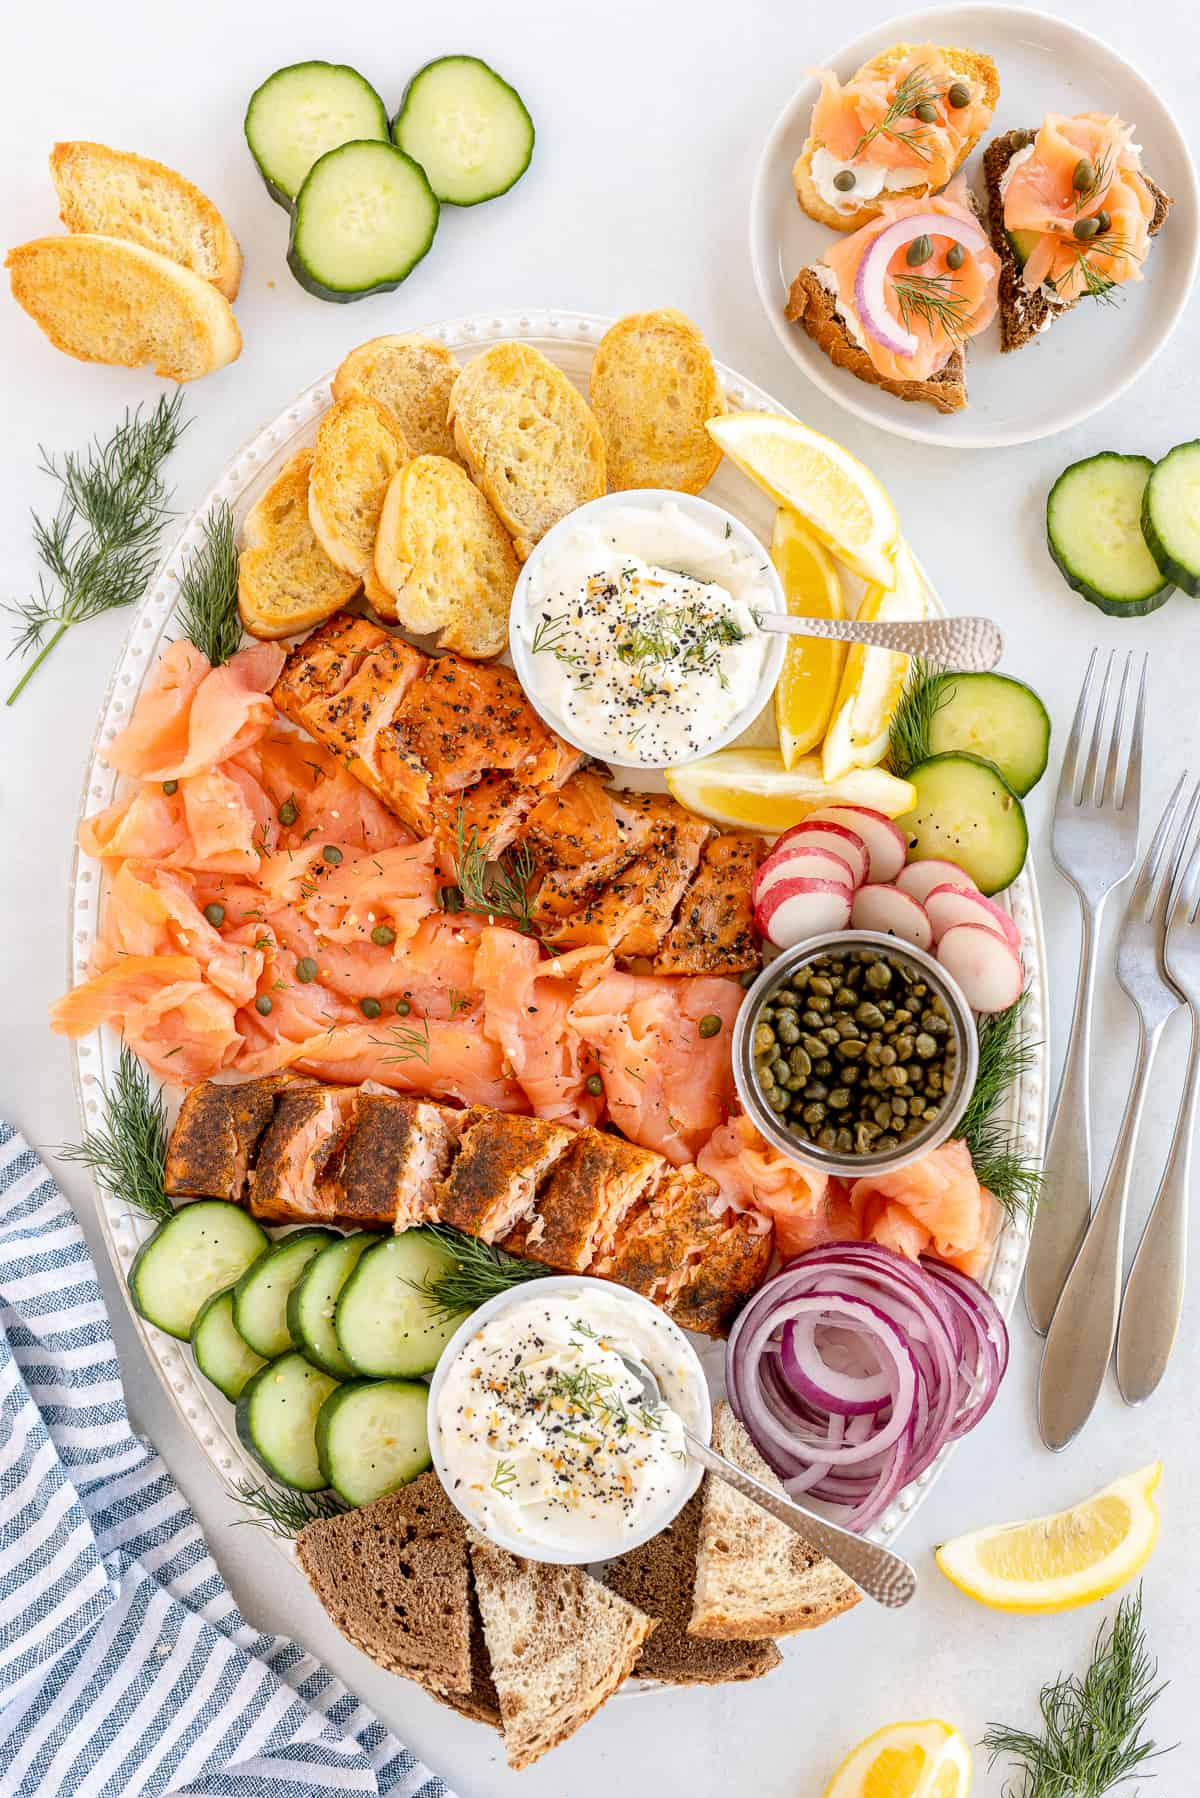 Valerie's KItchen salmon platter is filled with sour cream, bagel chips, and salmon.